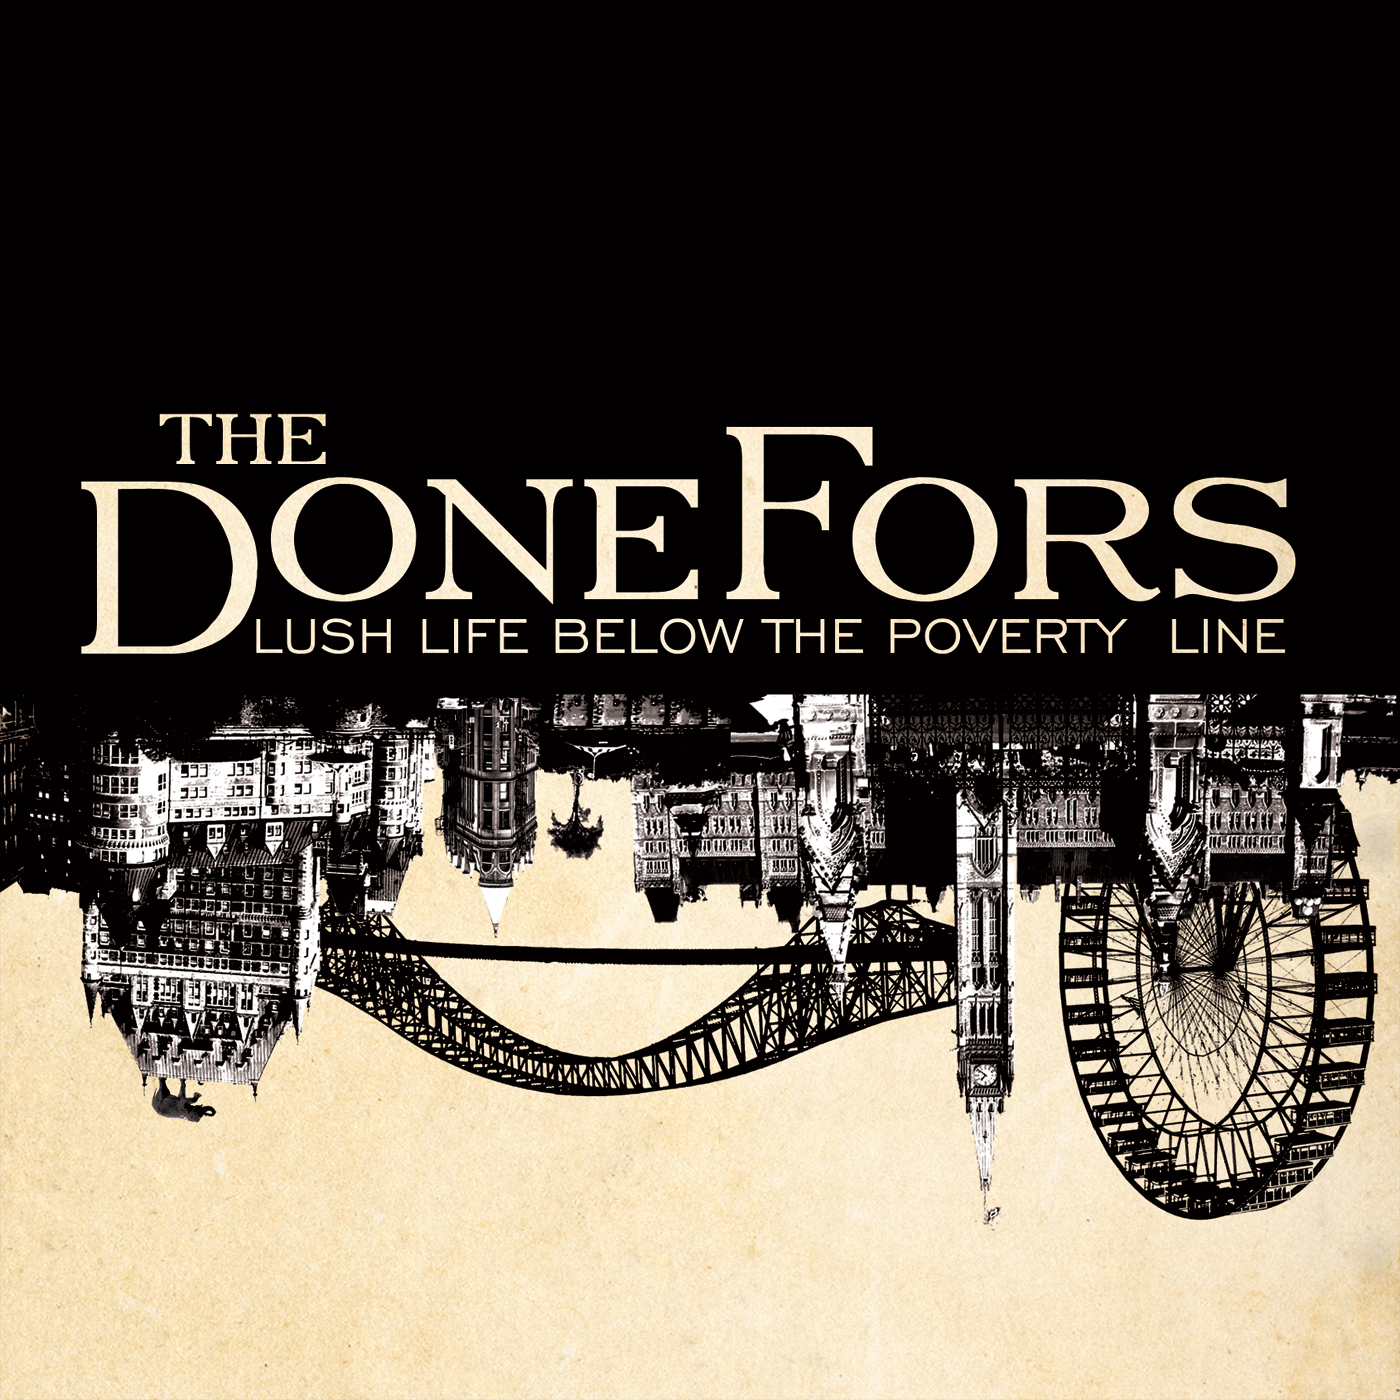 The DoneFors - Lush Life Below the Poverty Line